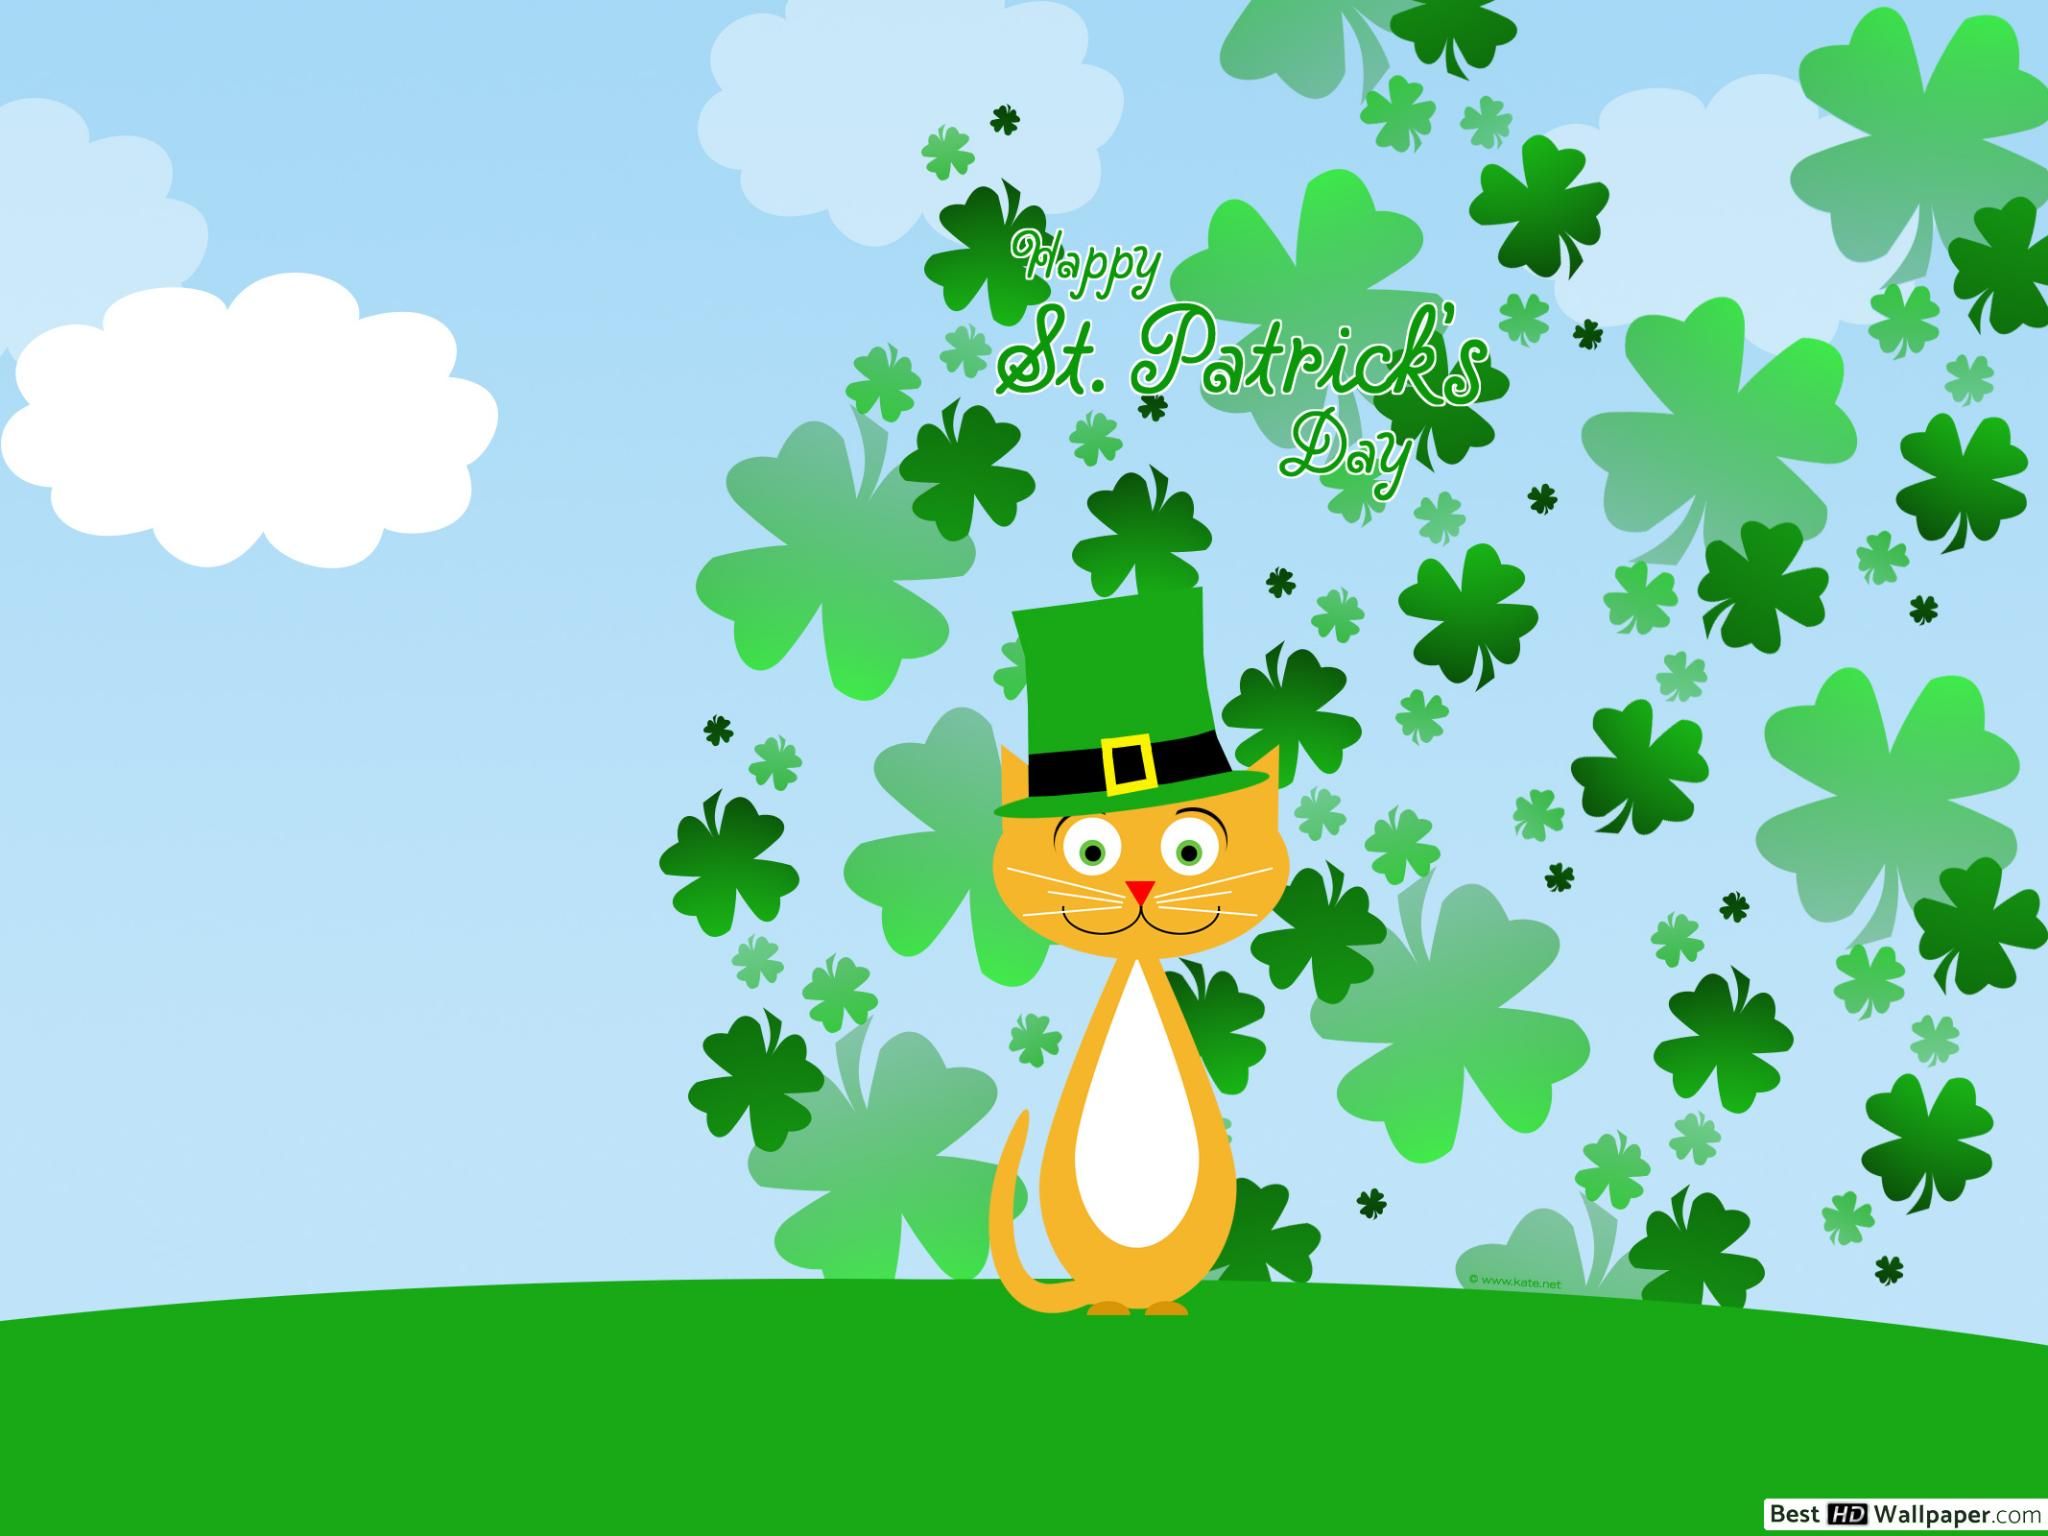 Lucky Cat and Green Hat on St. Patrick .besthdwallpaper.com